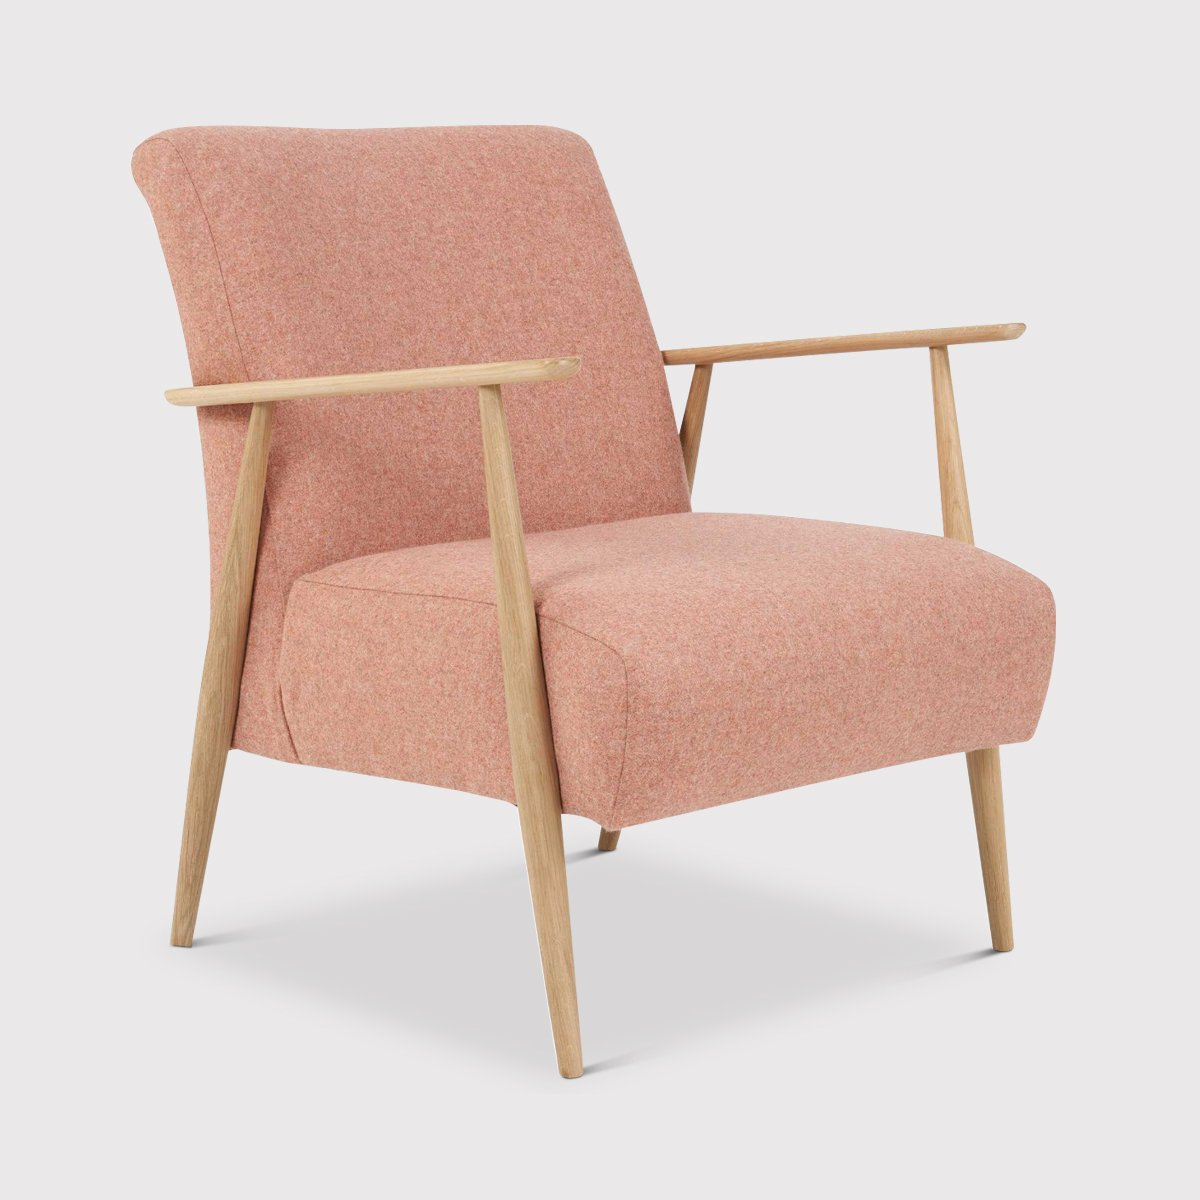 Ercol Marlia Accent Chair, Pink Fabric | Barker & Stonehouse